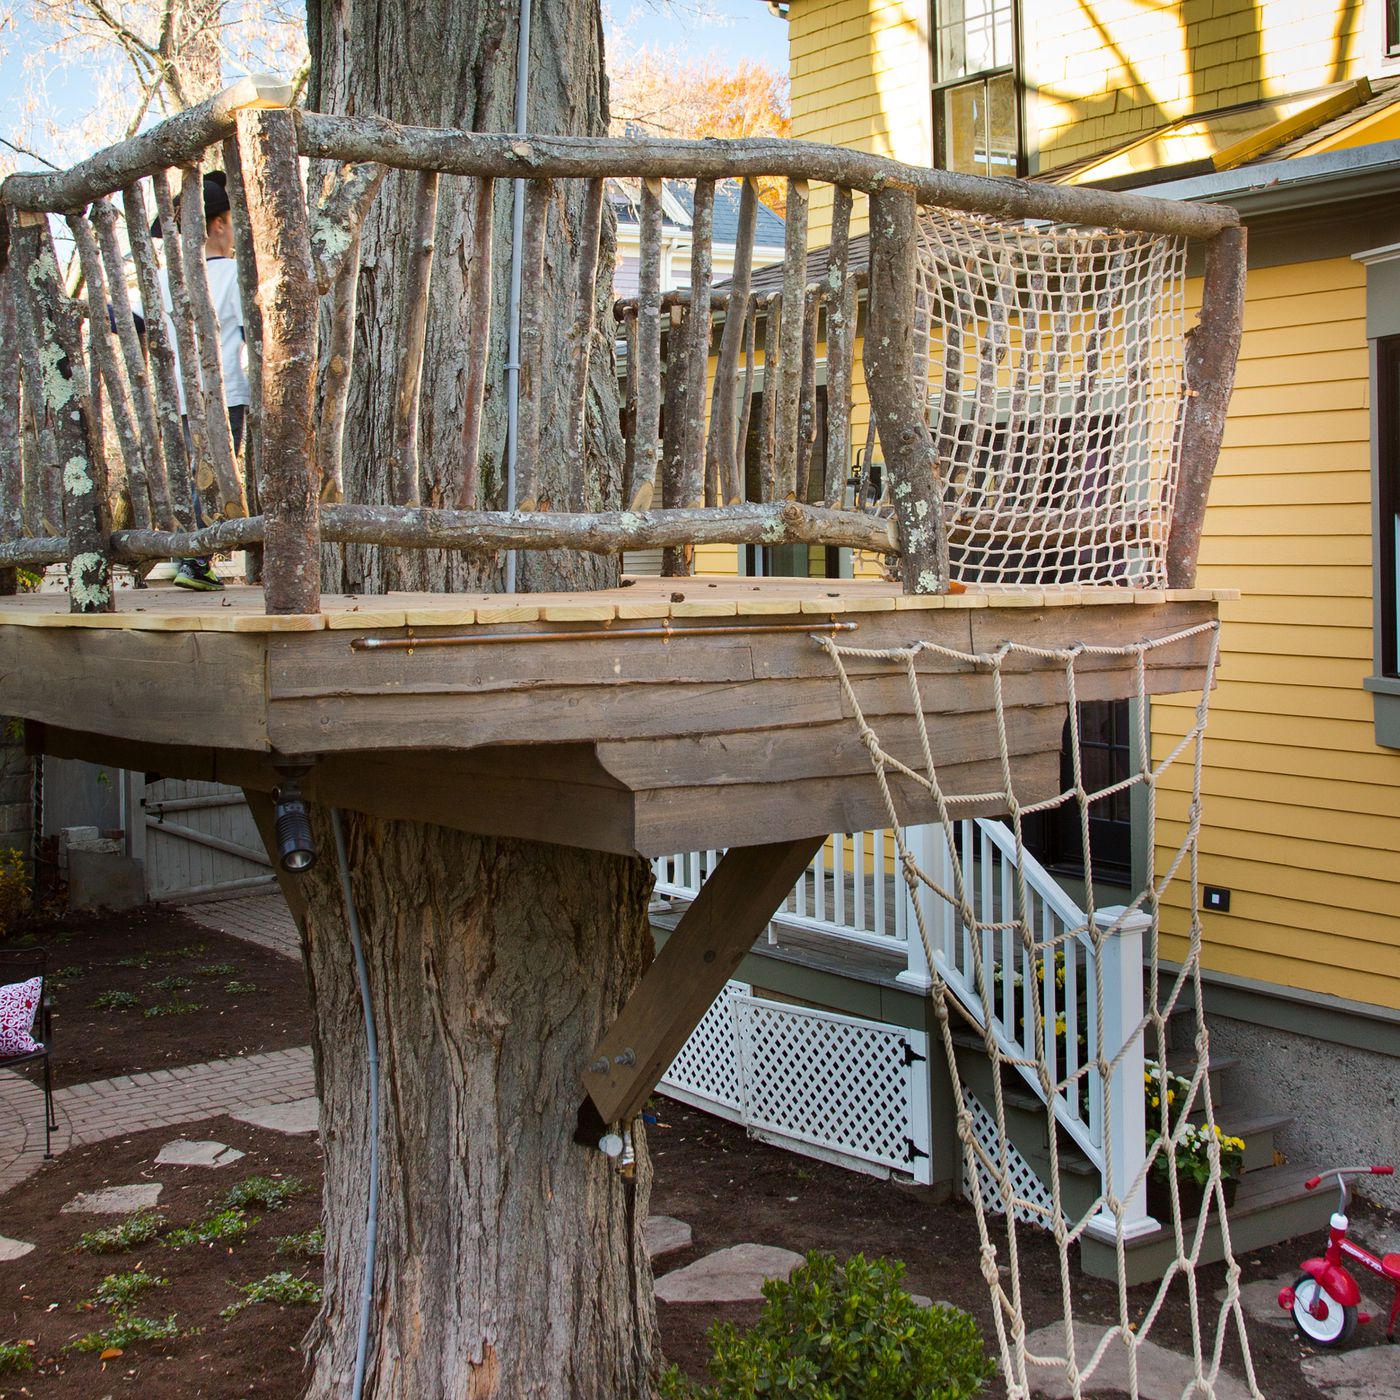 How to build a treehouse on one tree